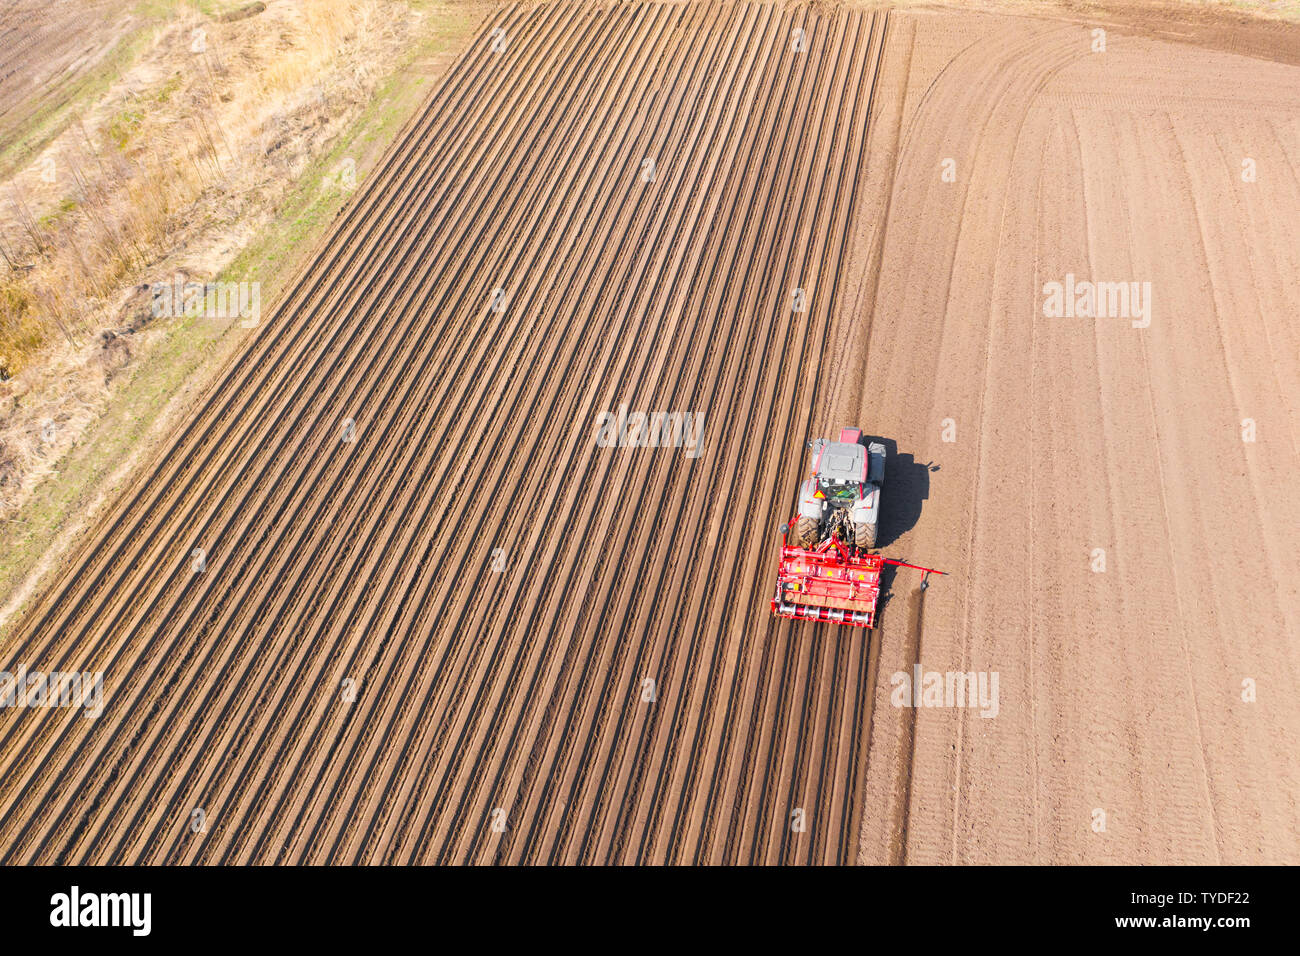 Tractor with disc harrows on farmland, top view. Tractor cuts furrows in a plowed field. Preparing the field for planting vegetables. Agricultural work with a tractor. Stock Photo